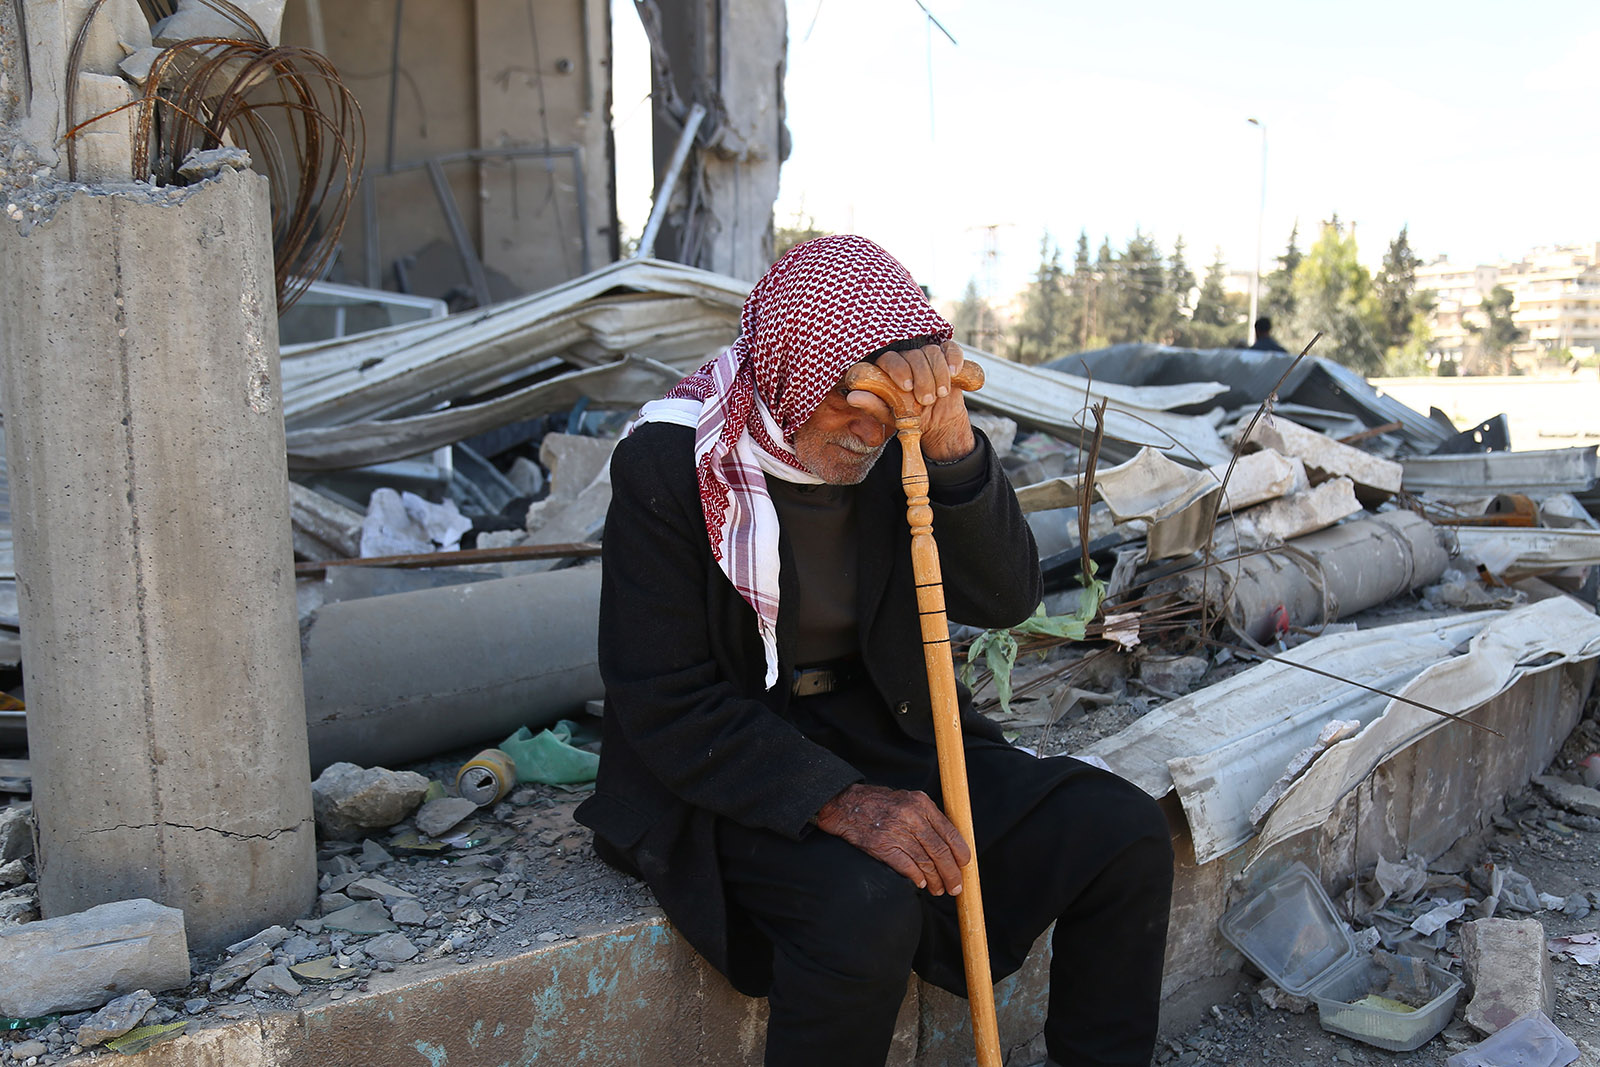 A Syrian man resting amid the rubble of a home in Afrin, March 31, 2018